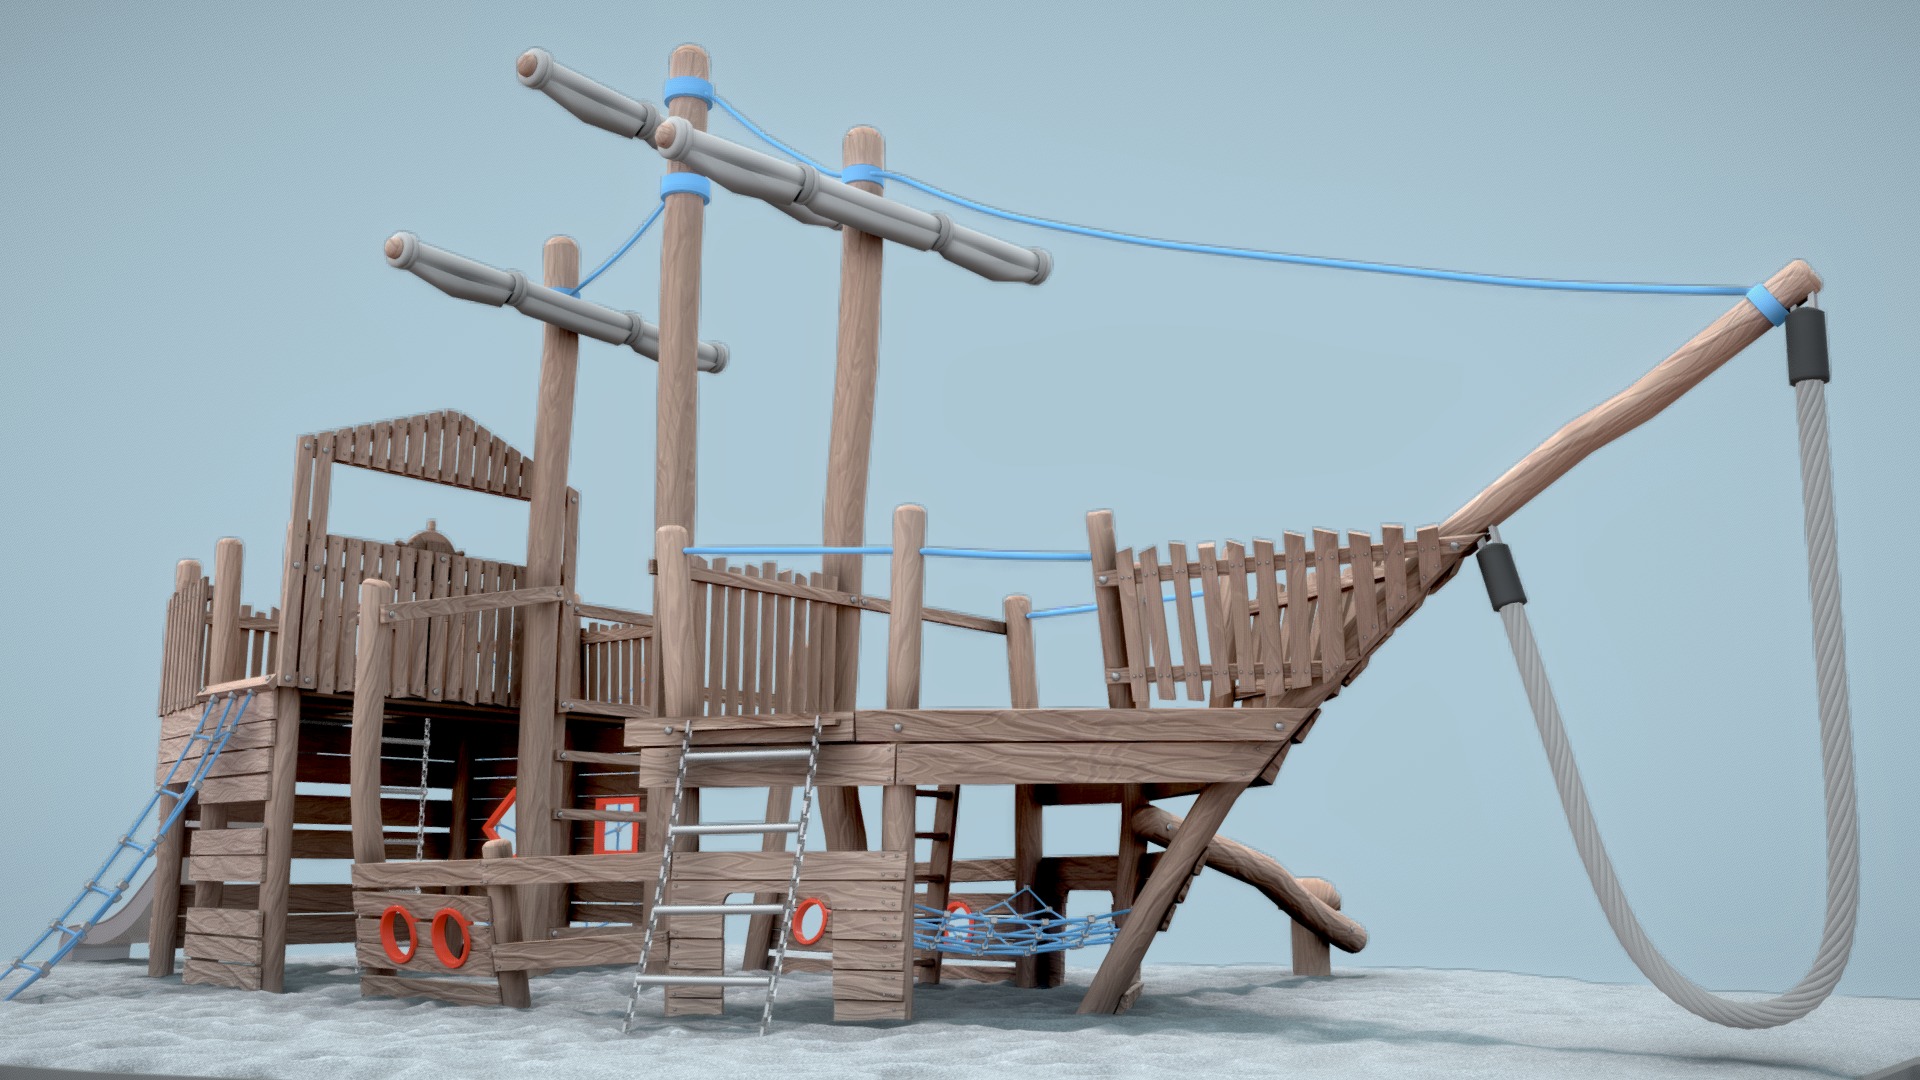 3D model Playground Wood Ship (wip-6) - This is a 3D model of the Playground Wood Ship (wip-6). The 3D model is about a wooden structure with a slide.